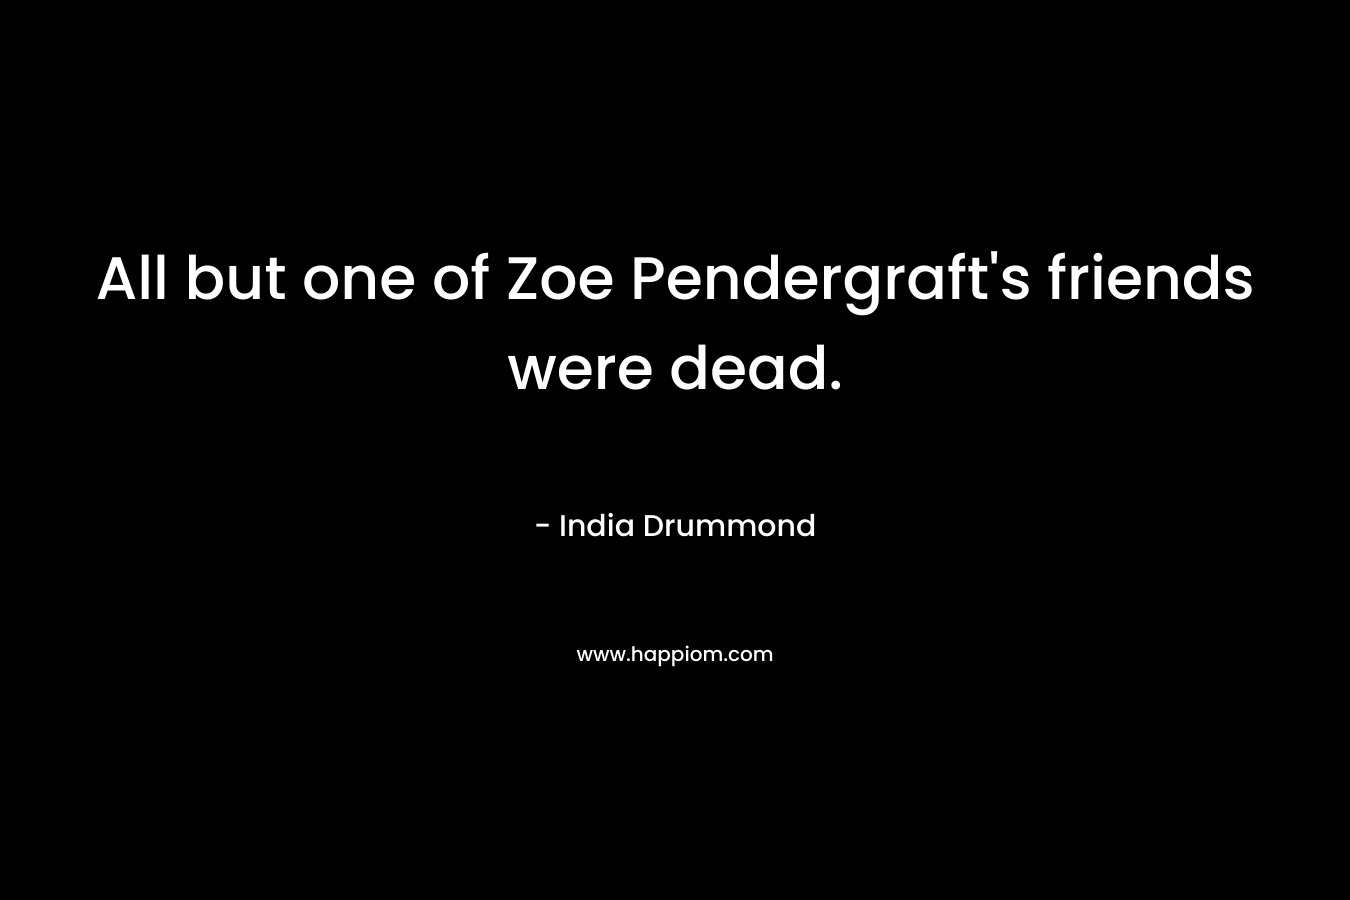 All but one of Zoe Pendergraft’s friends were dead. – India Drummond